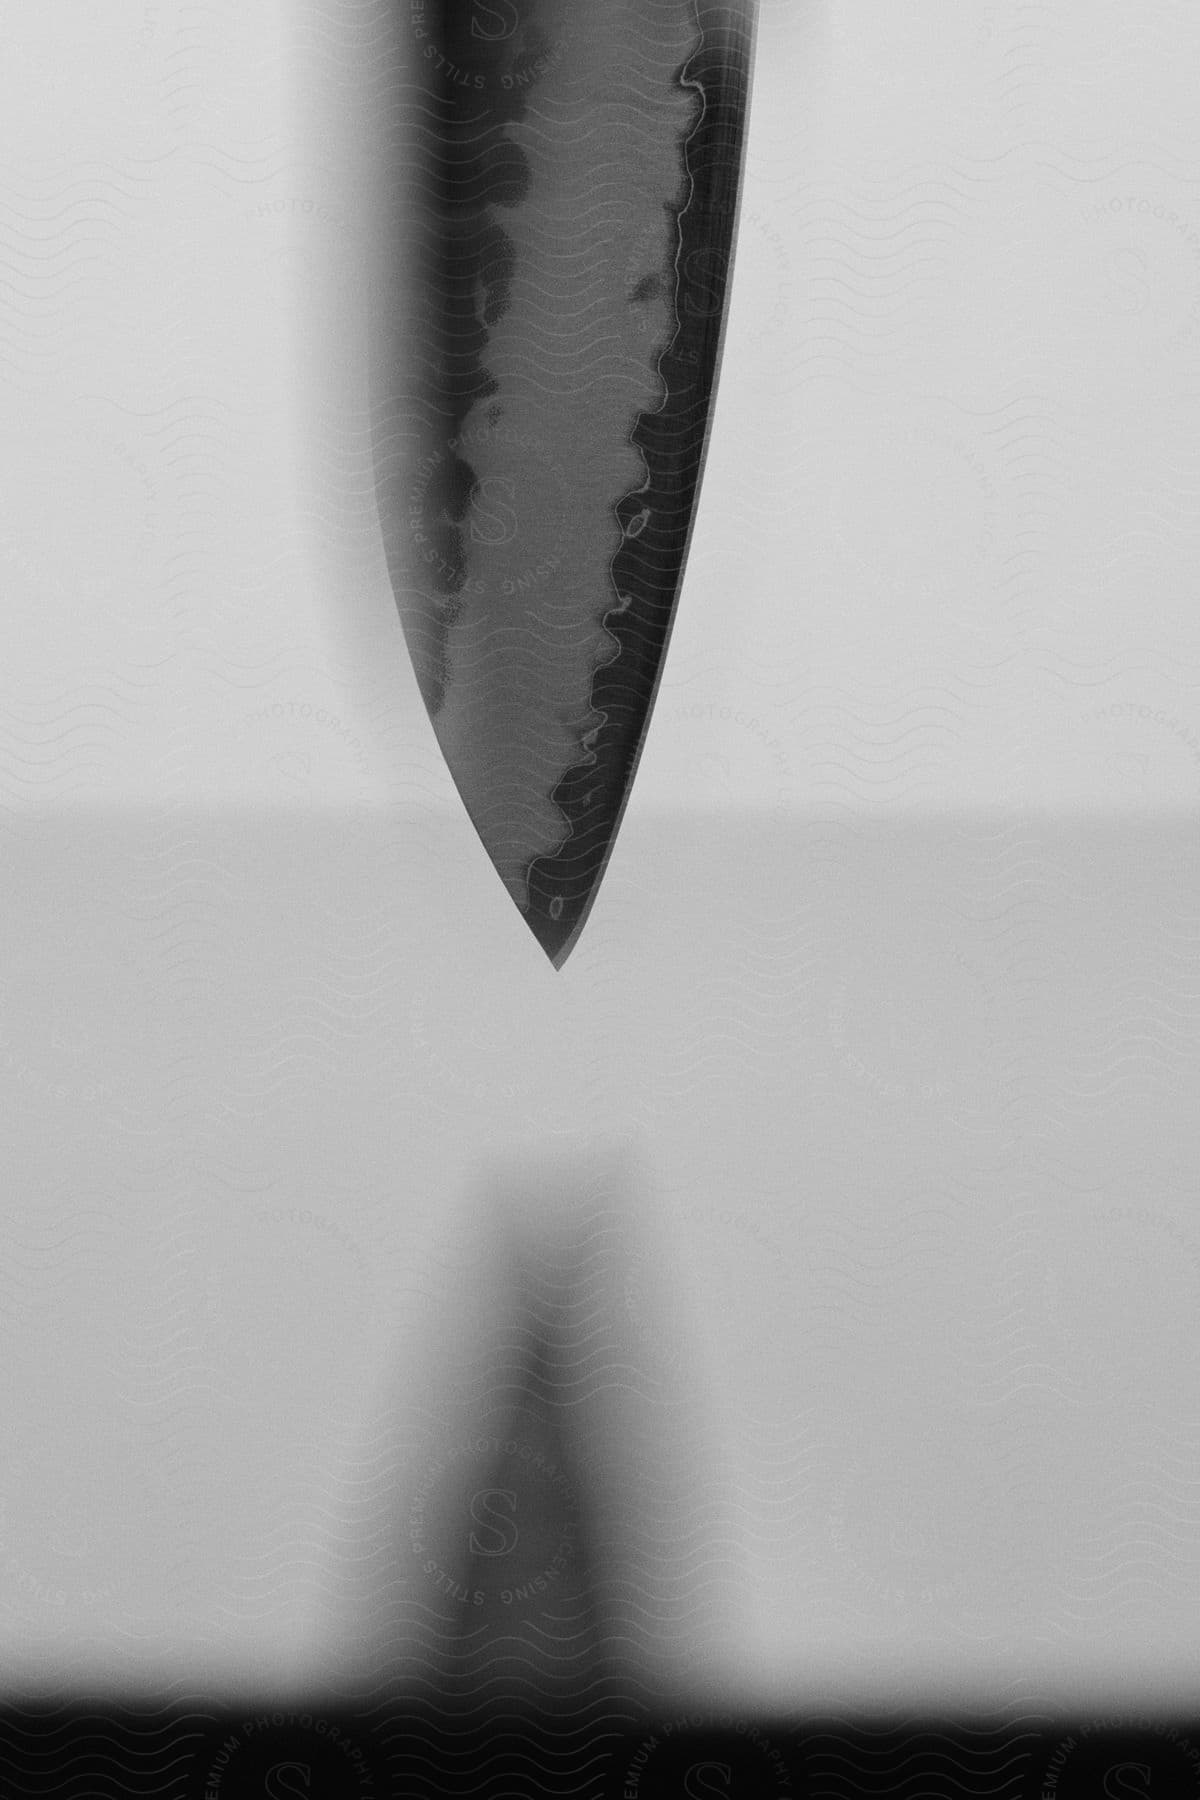 Tip of an abstract knife in black and white.